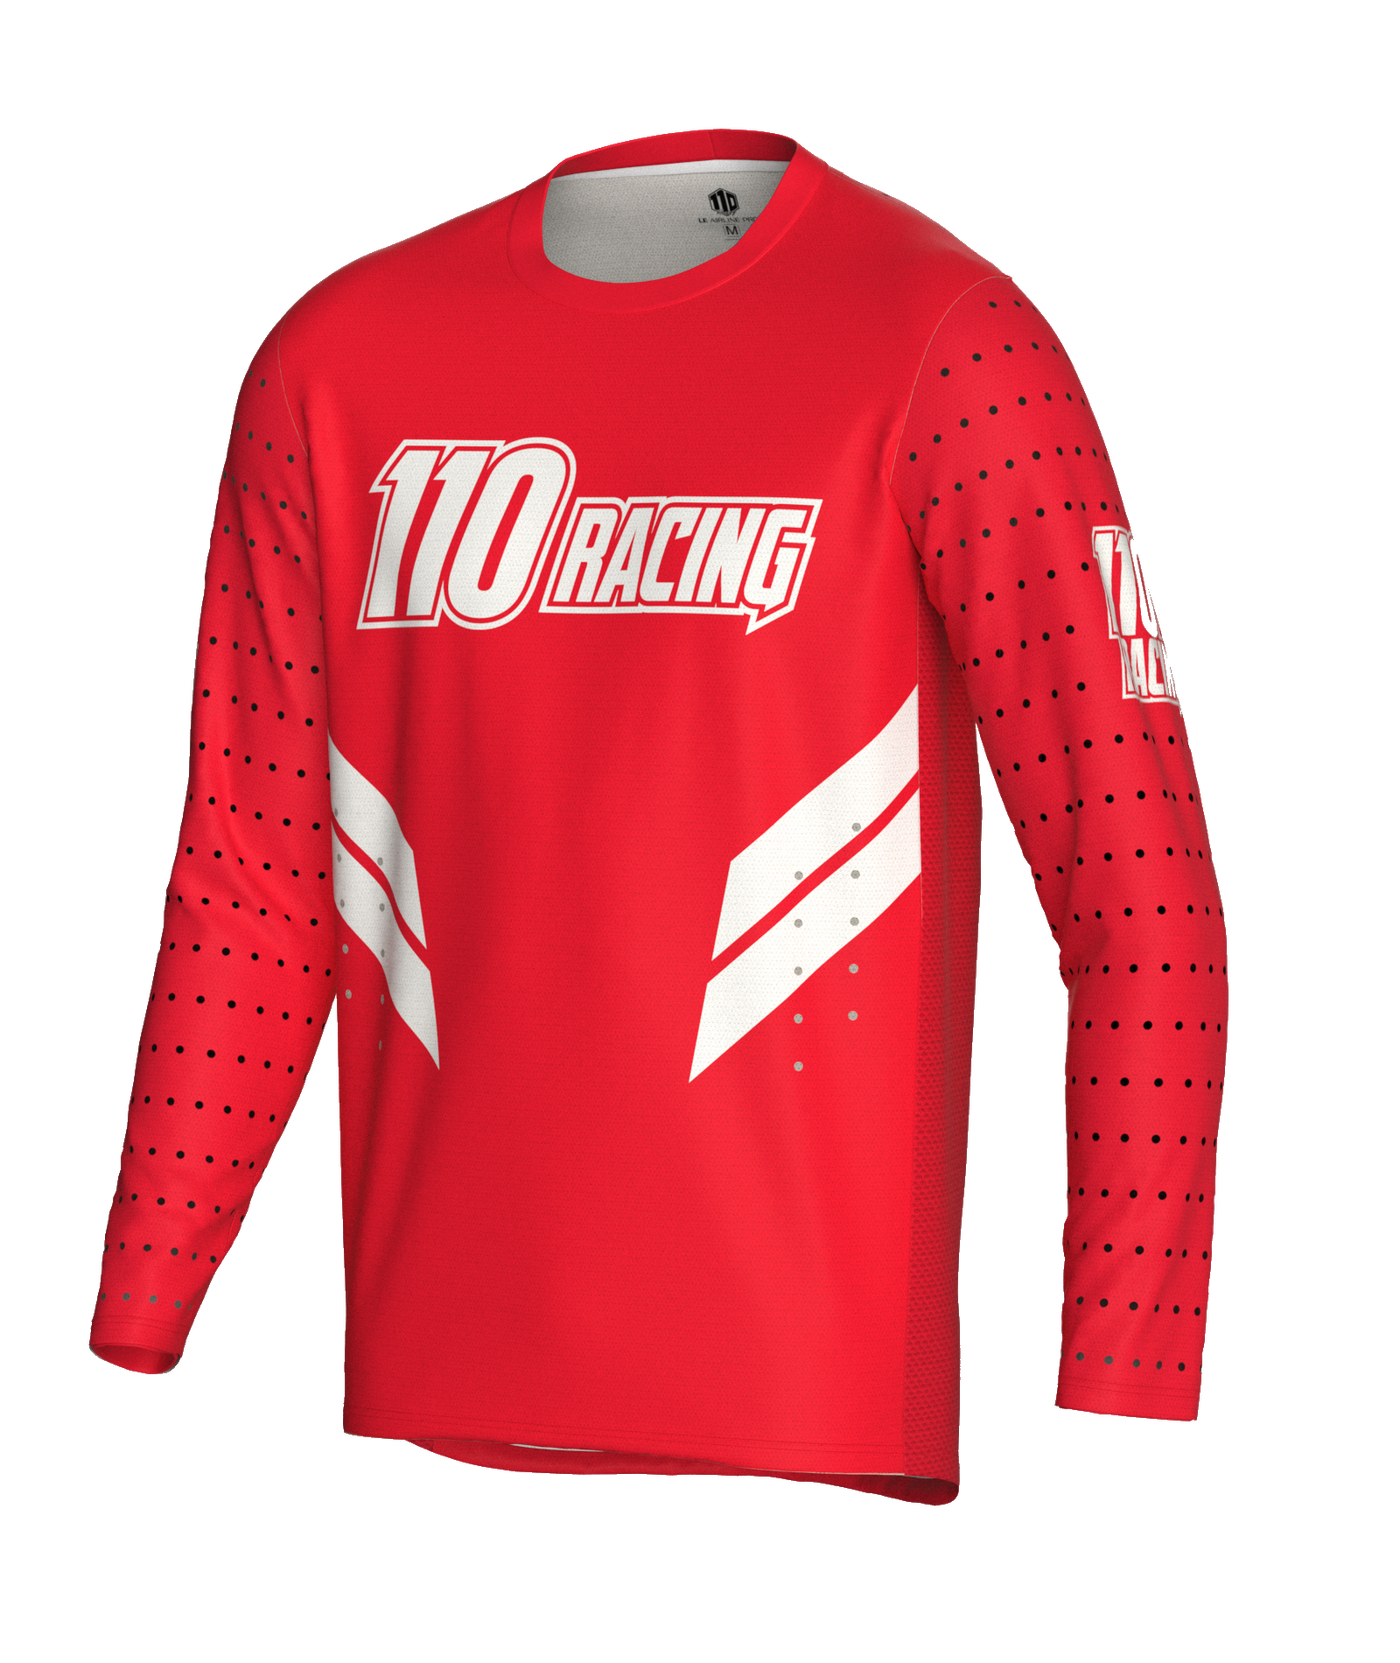 110 RACING // LE AIRLINE PRO YOUTH